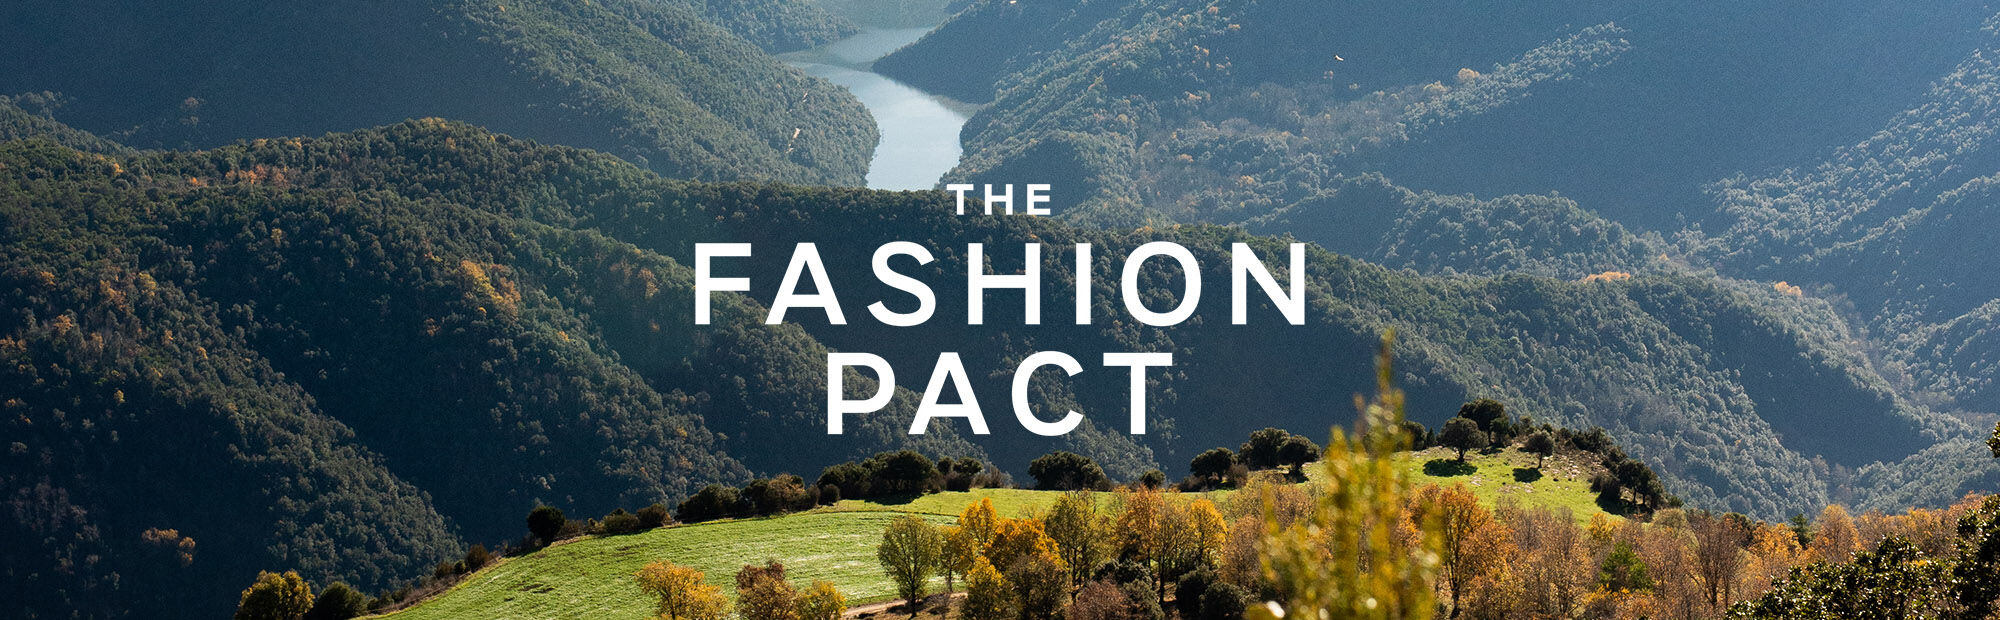 Desigual becomes a member of The Fashion Pact and sets new sustainability goals